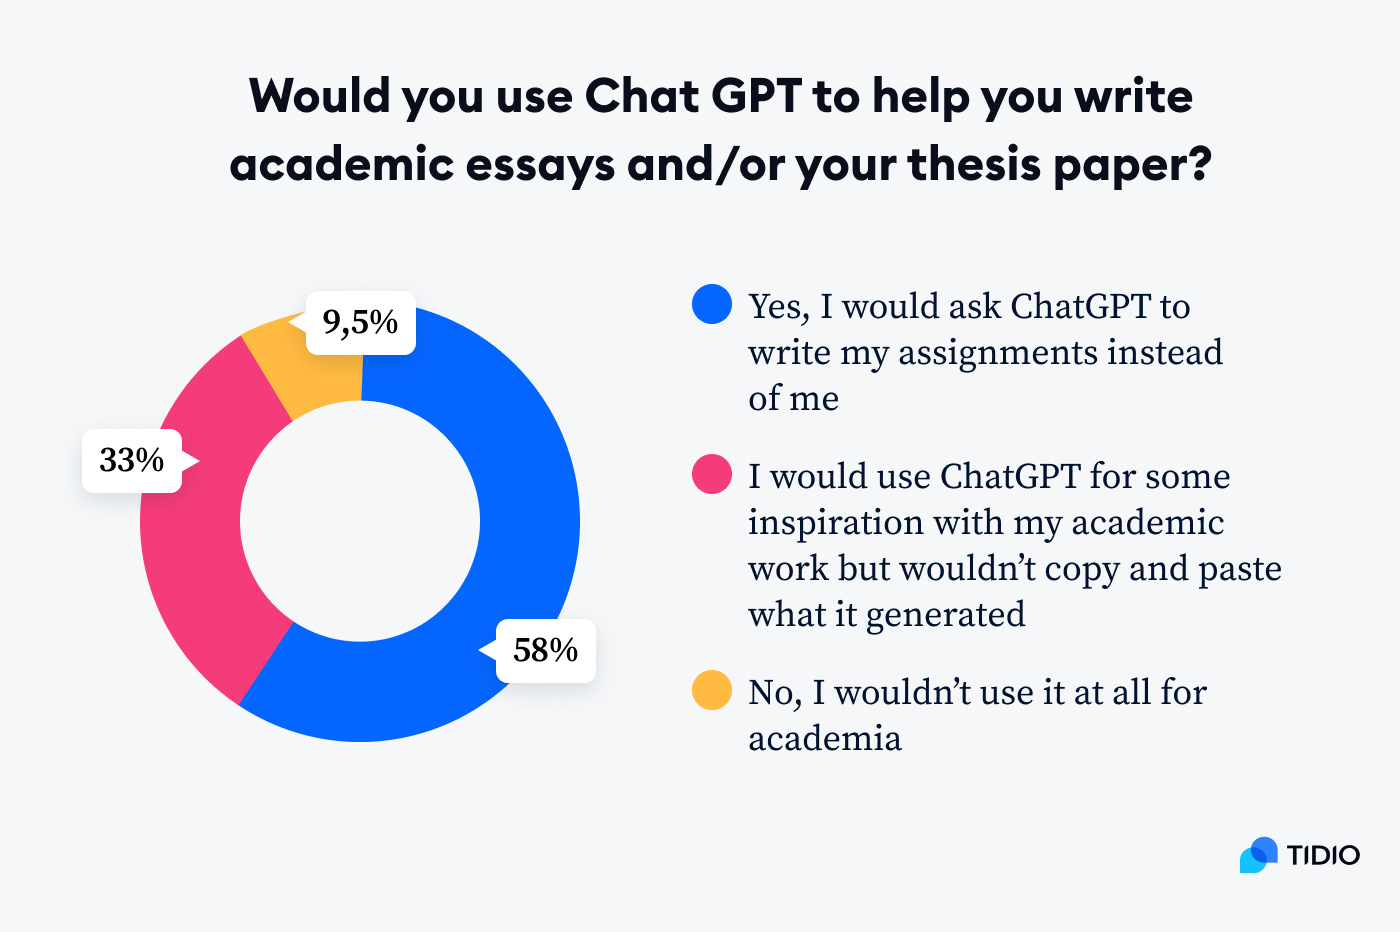 Around 57% of people would let ChatGPT write their thesis for them, but 94% consider it plagiarism image